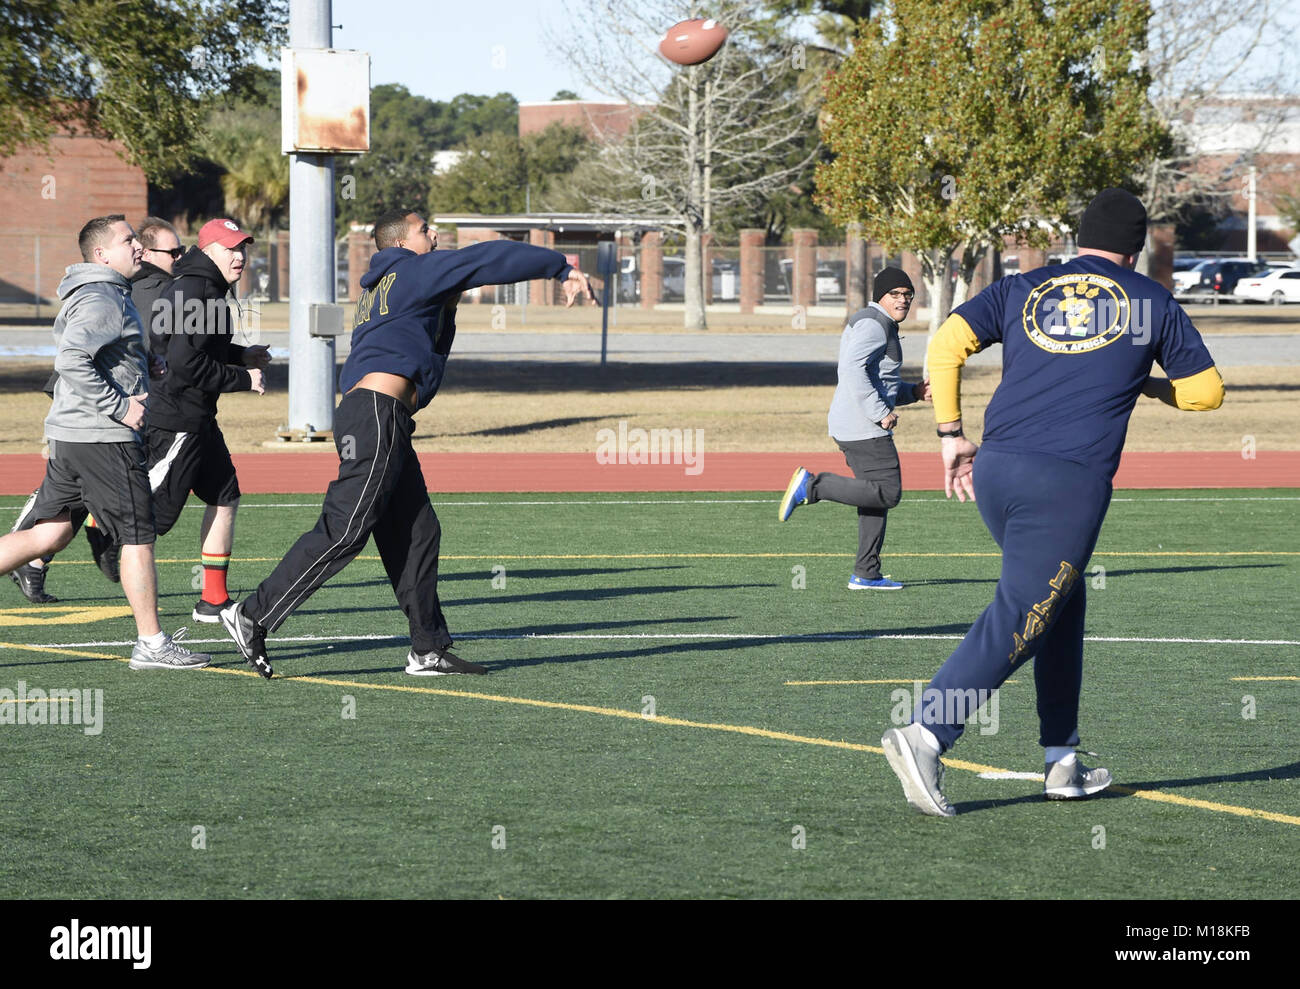 Fla. (Jan. 25, 2018) Center for Information Warfare Training (CIWT) staff participate in an Ultimate Football physical fitness session on board Naval Air Station Pensacola Corry Station, Florida. CIWT staff takes physical fitness seriously and regularly trains together to strengthen teamwork and maintain readiness. (U.S. Navy Stock Photo